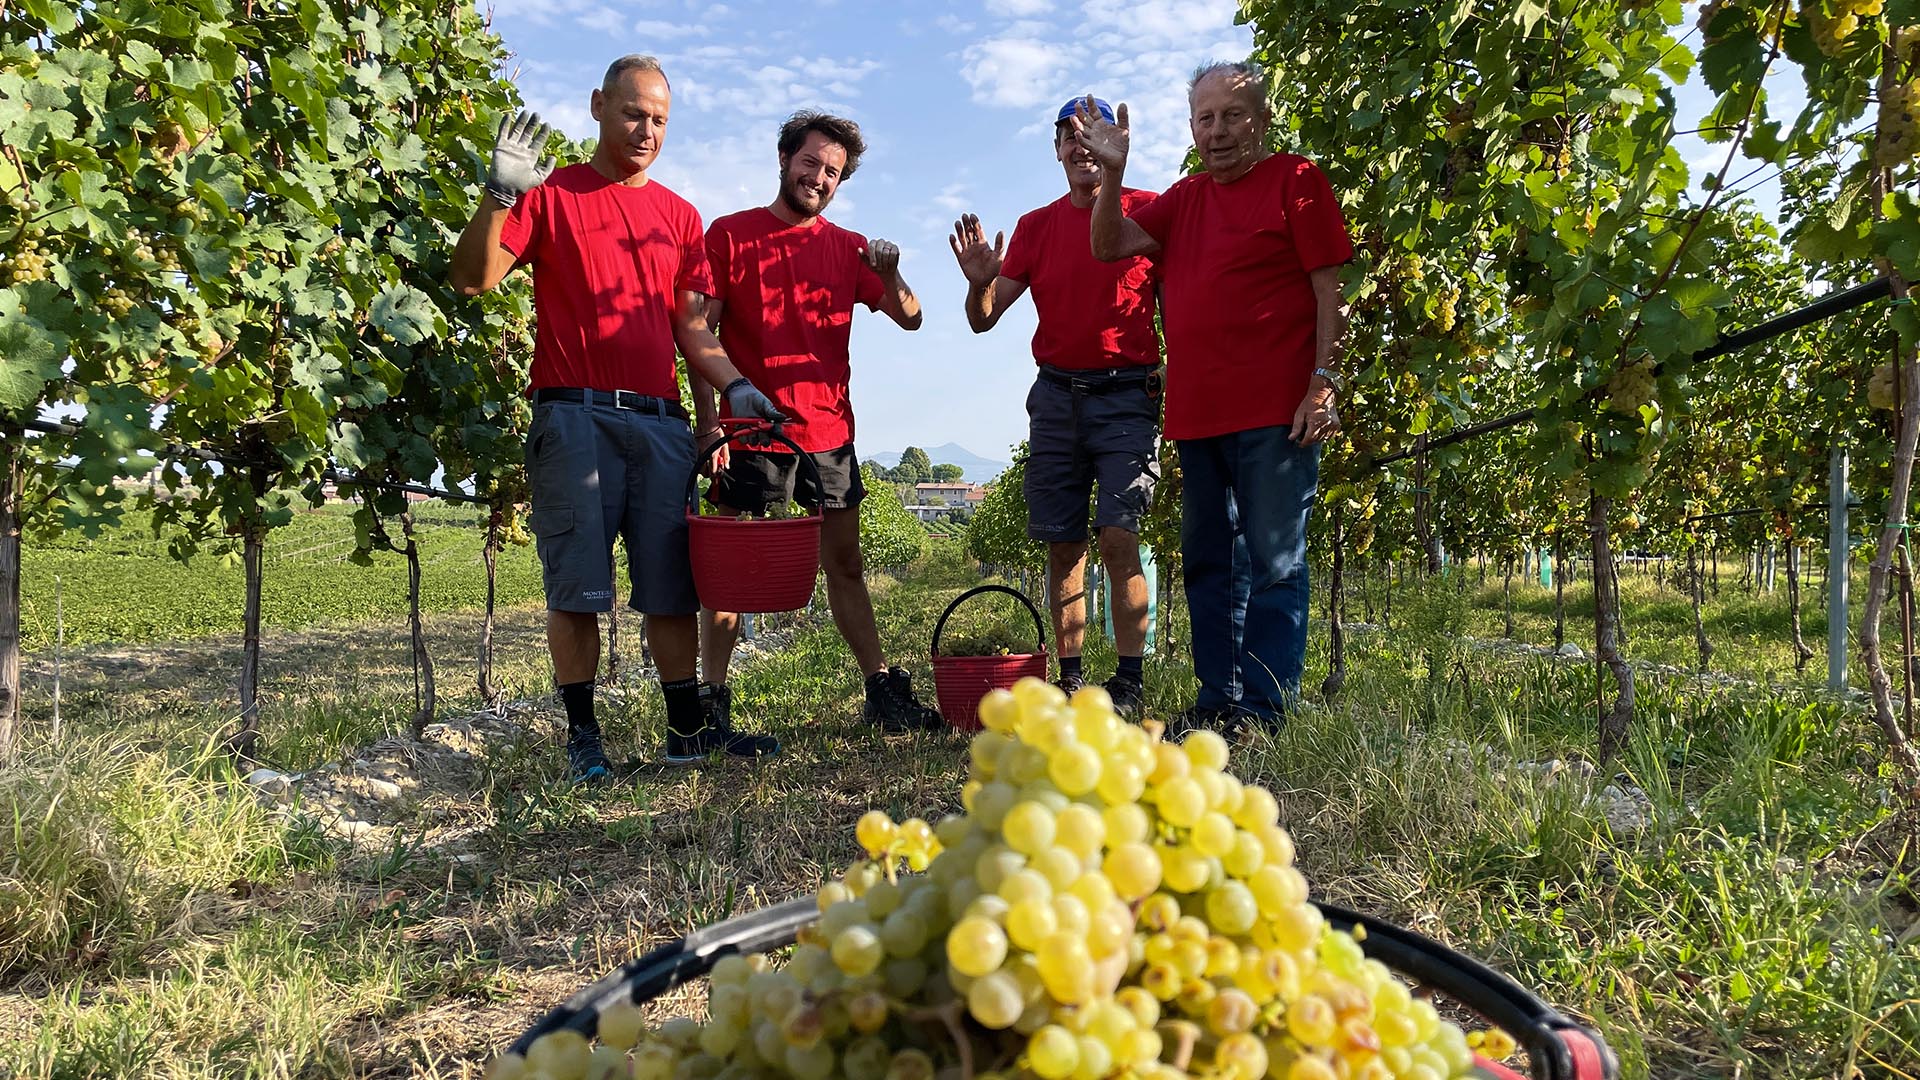 The 2021 Harvest End At Monte Del Frà Winery .  A Look of Behind the Scenes